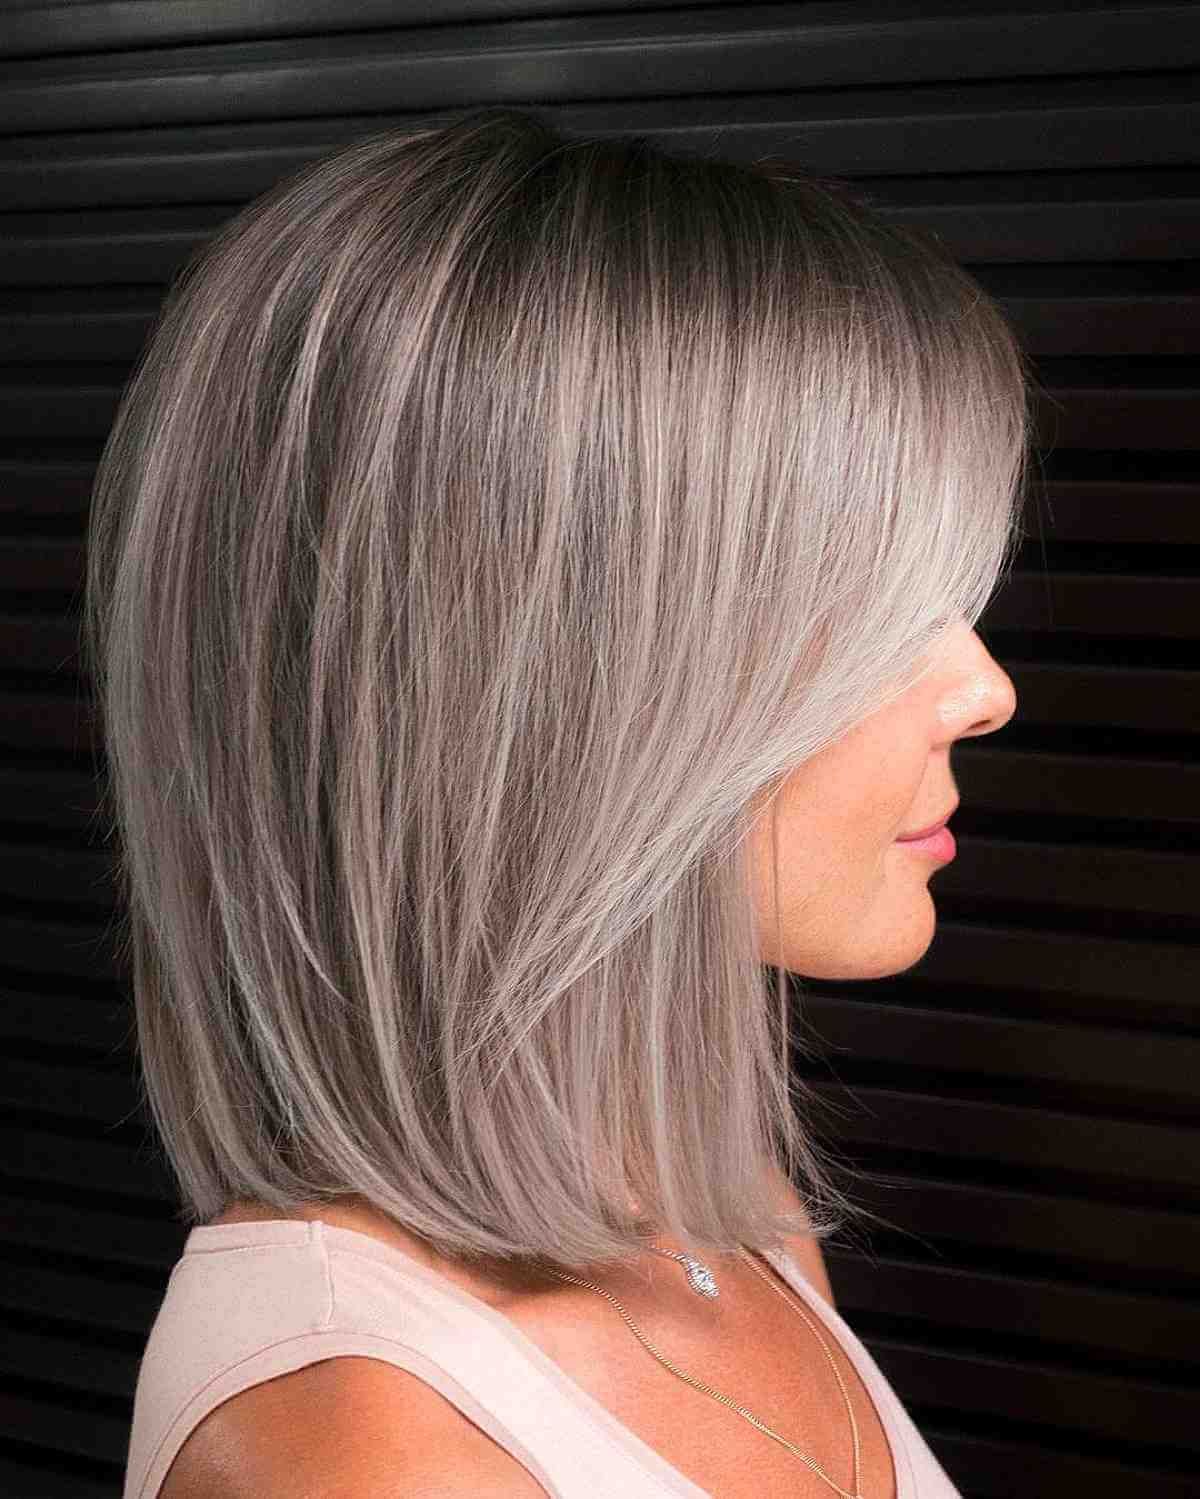 46 Greatest Silver Hair Color Ideas Of 2022 For Edgy Lavender Short Hairstyles With Aqua Tones (View 15 of 20)